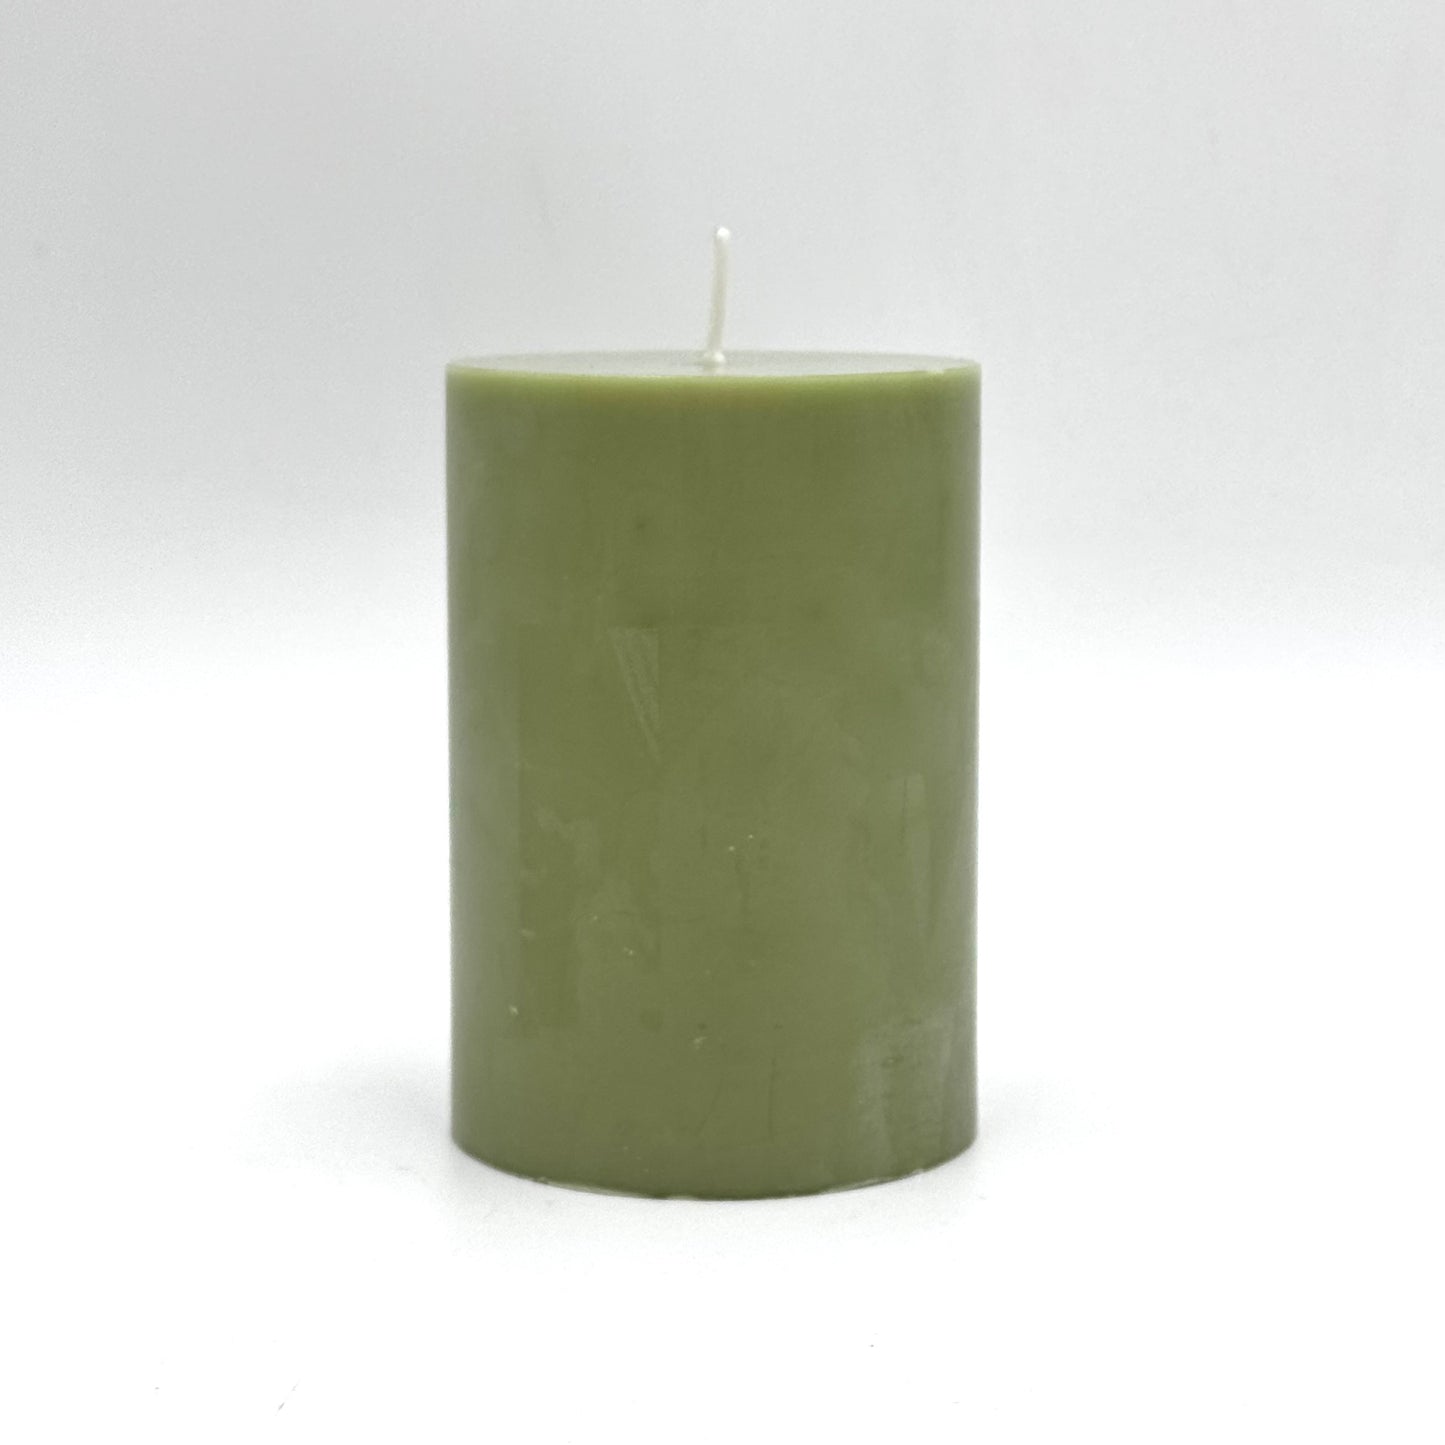 Stearin lace candle, ⌀ 7x10 cm, light yellow